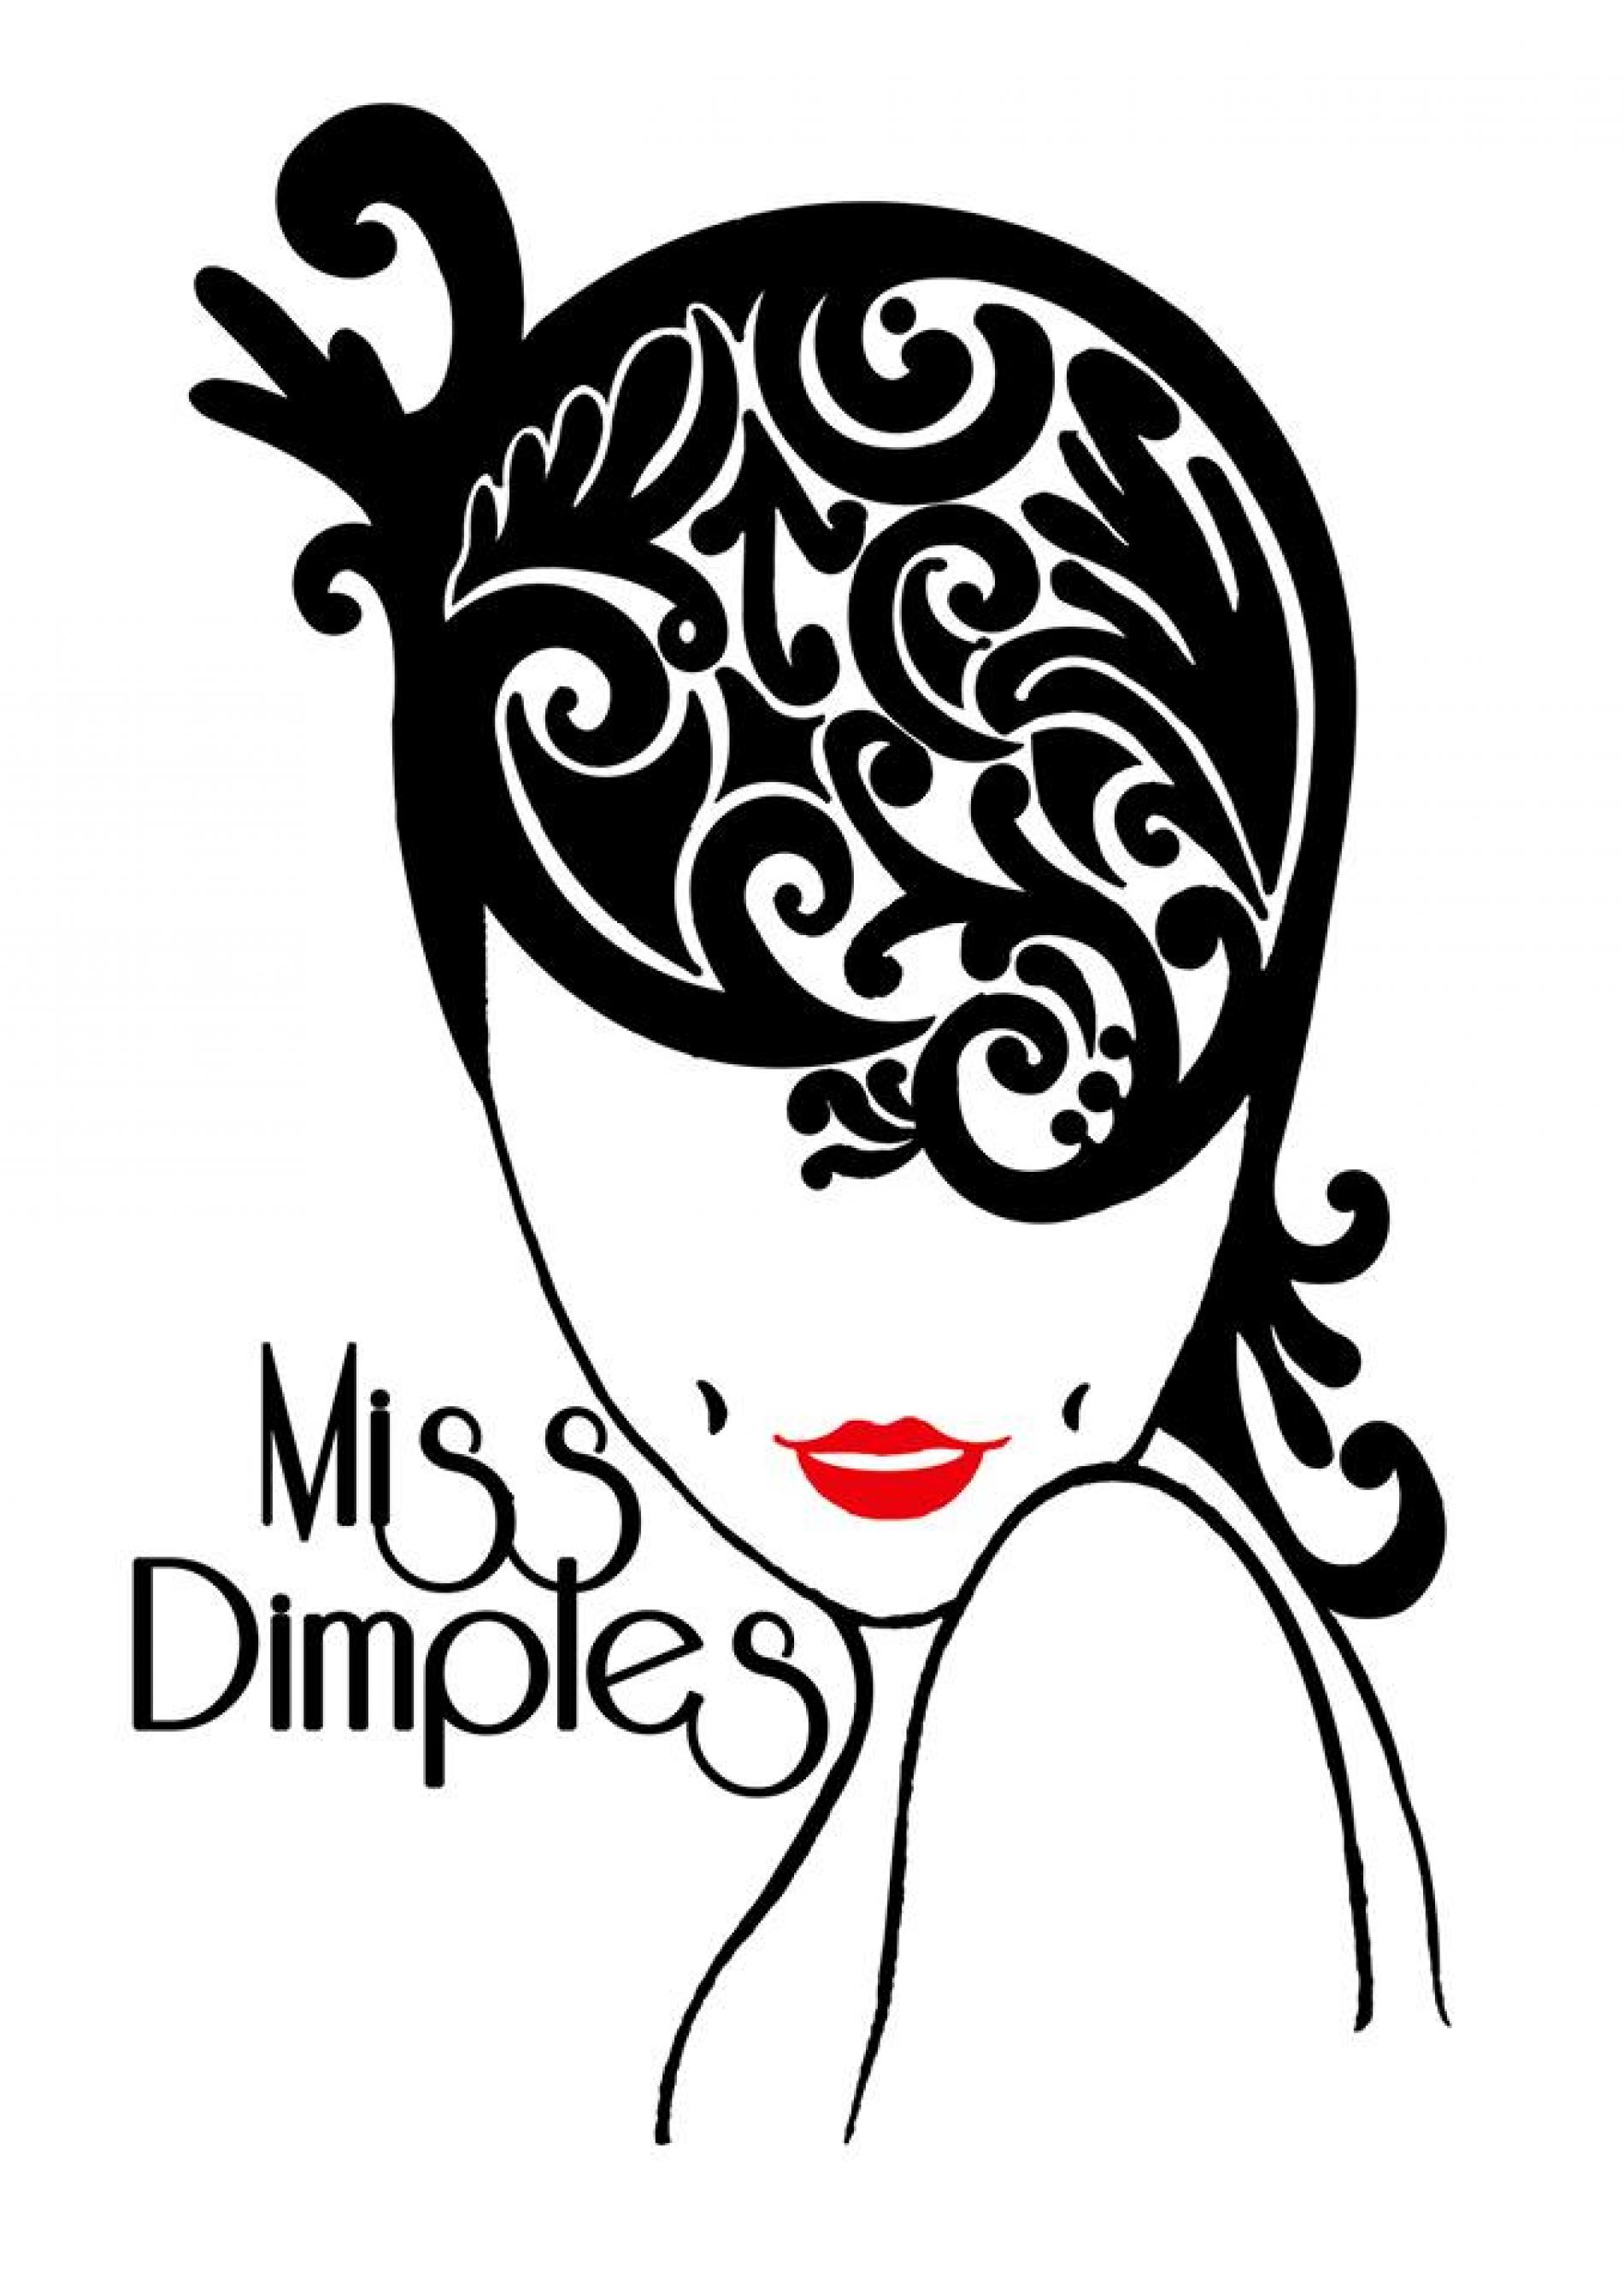 Get The Miss Dimples Tee